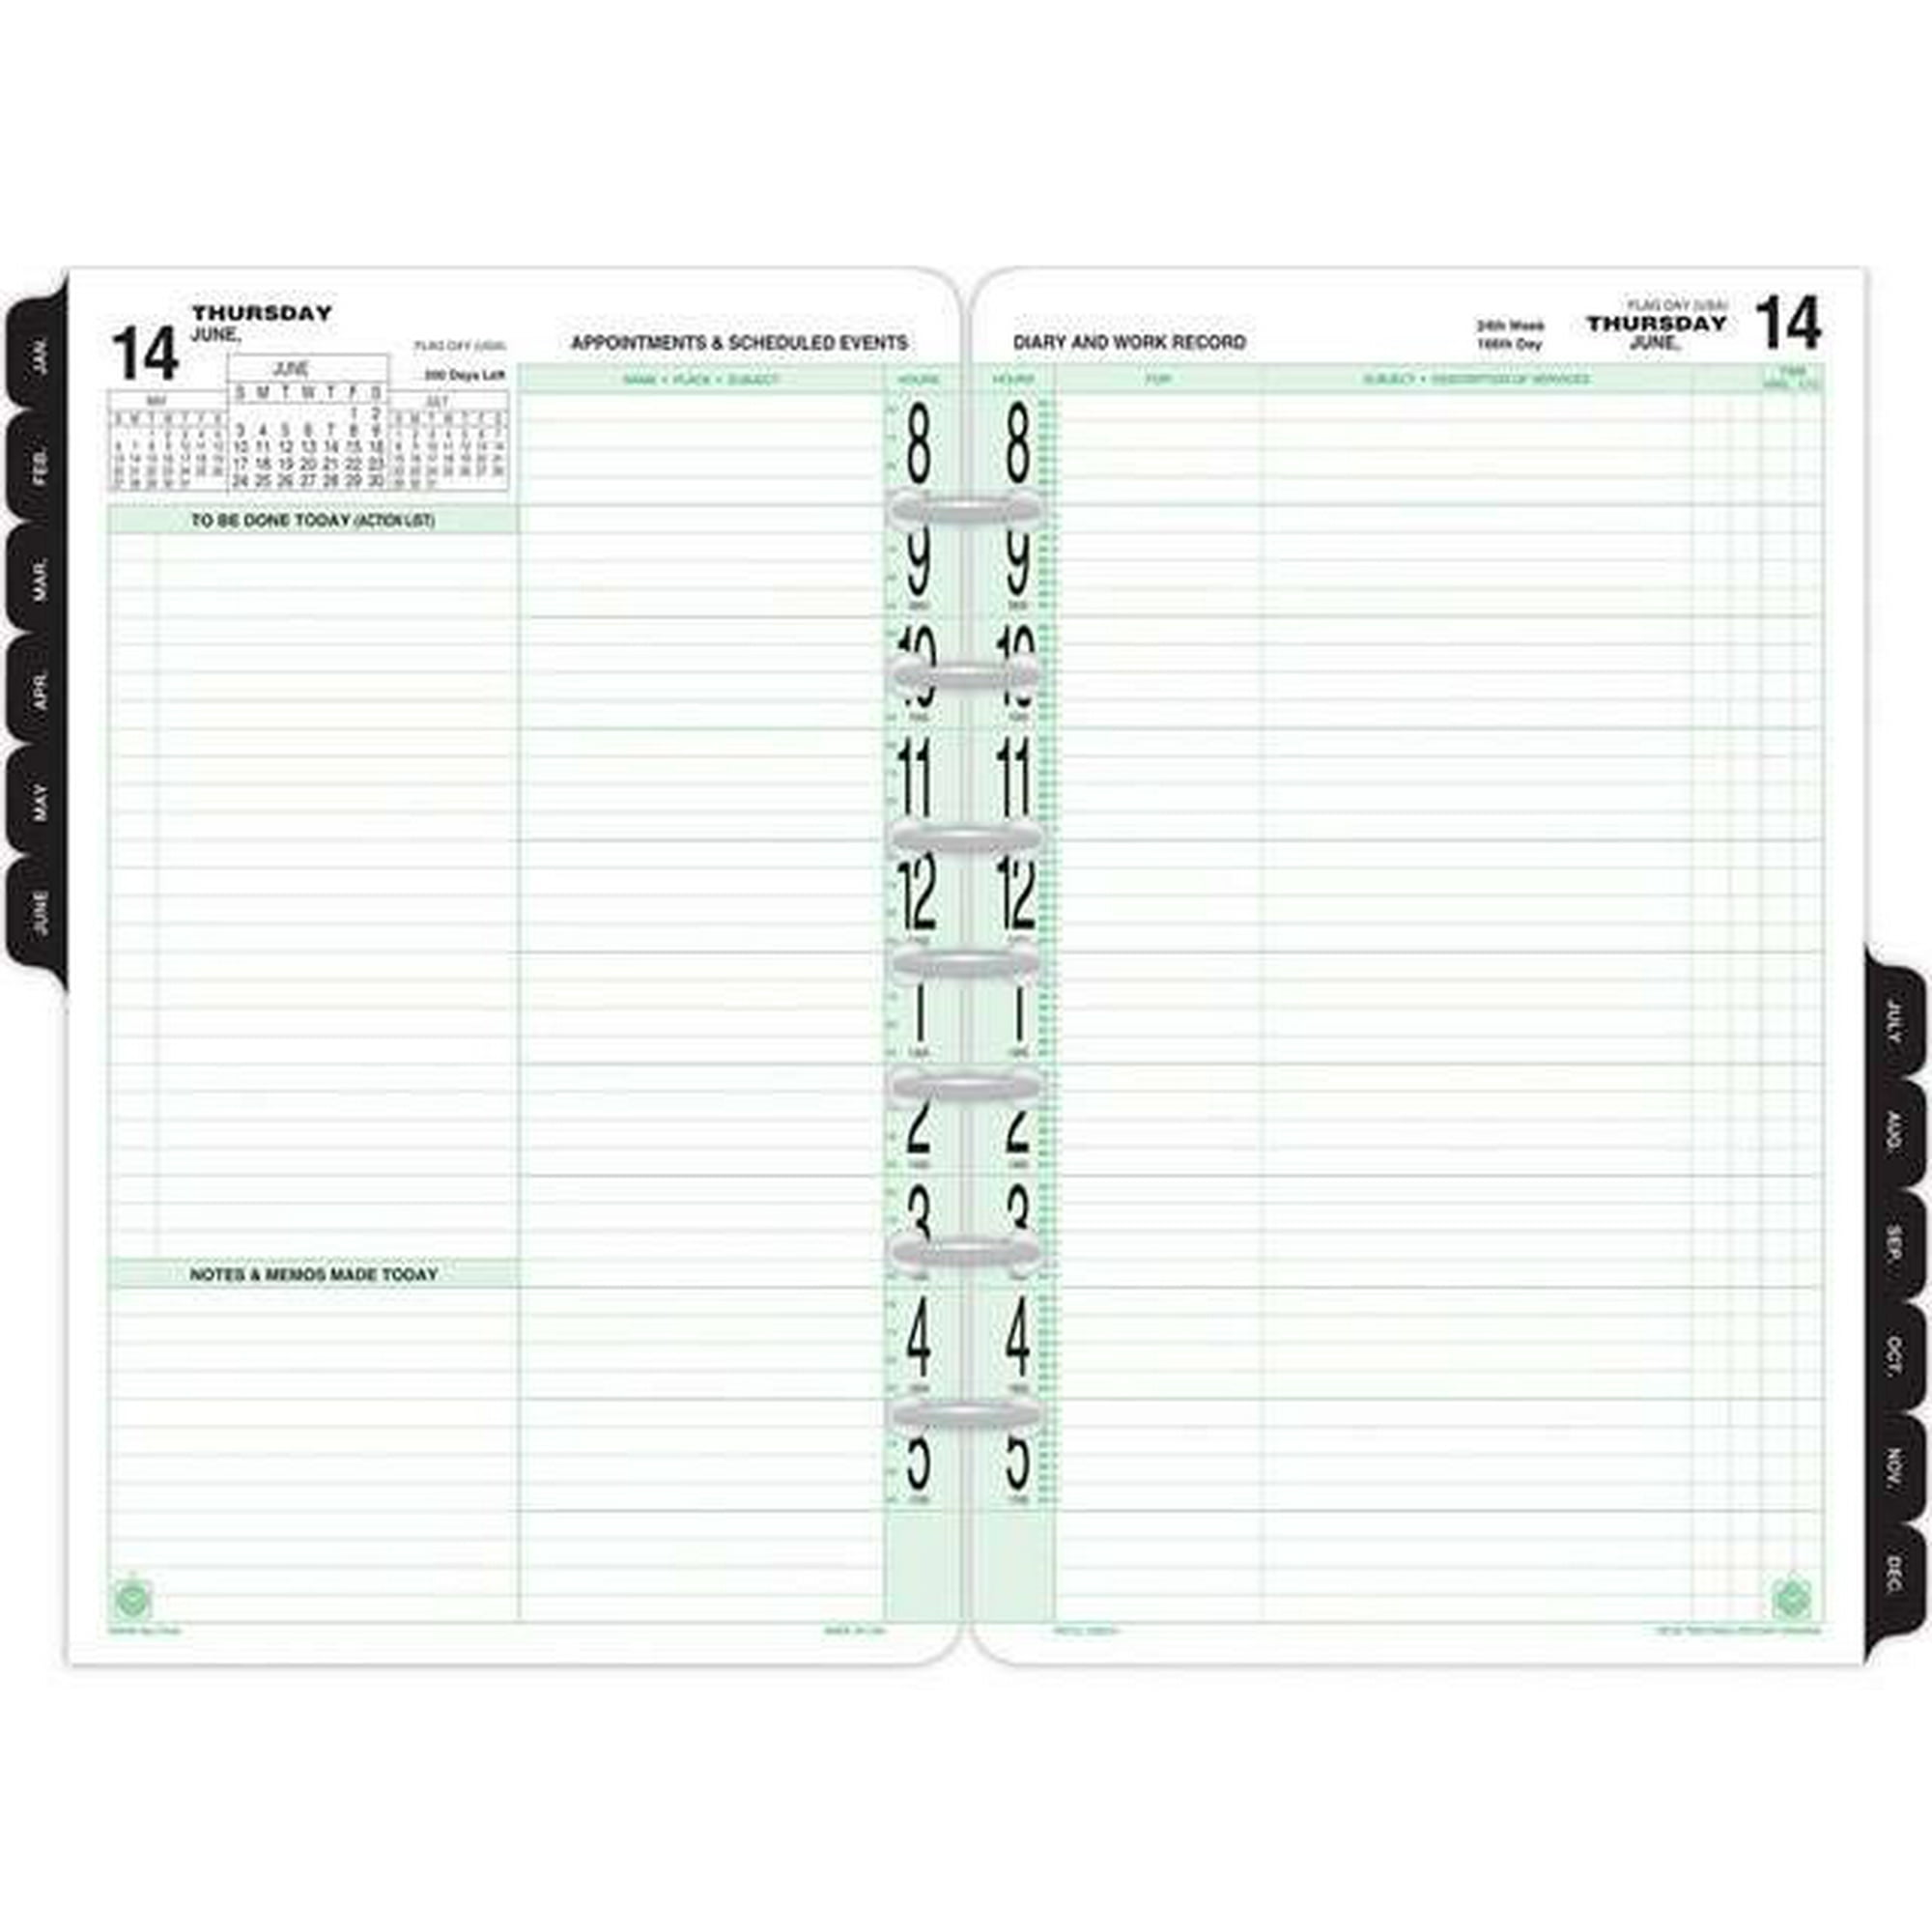 Day-Timer Two Page Per Day Reference Planner Refills, Loose-Leaf, Desk  Size, 5 1/2 x 8 1/2, Daily